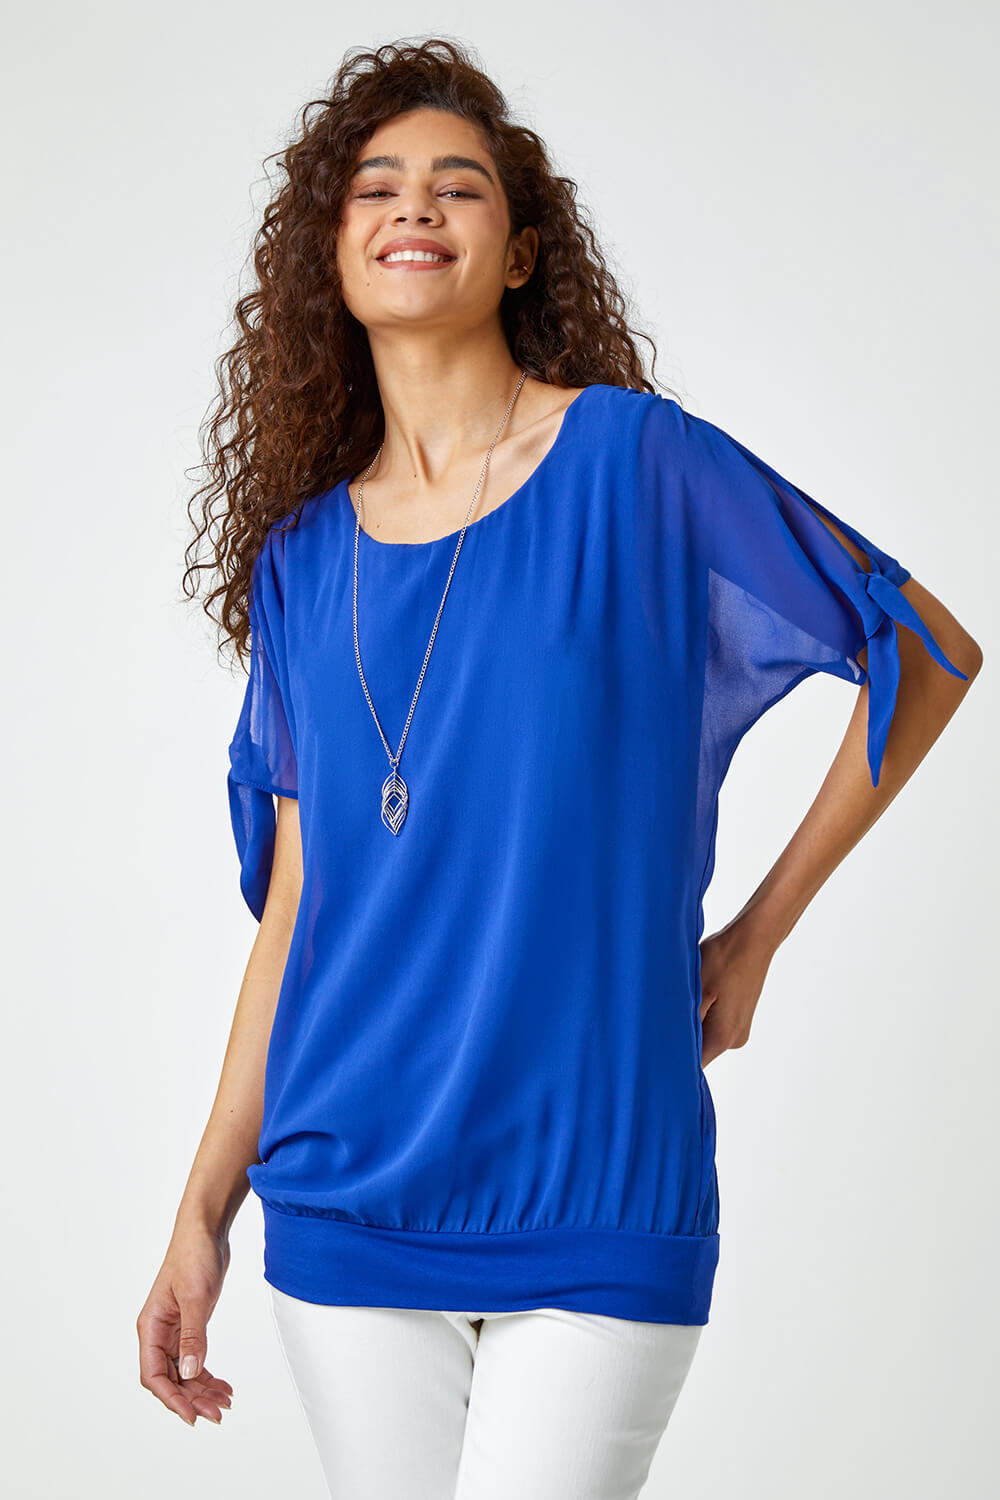 Royal Blue Chiffon Layered Tie Detail Top with Necklace, Image 2 of 5